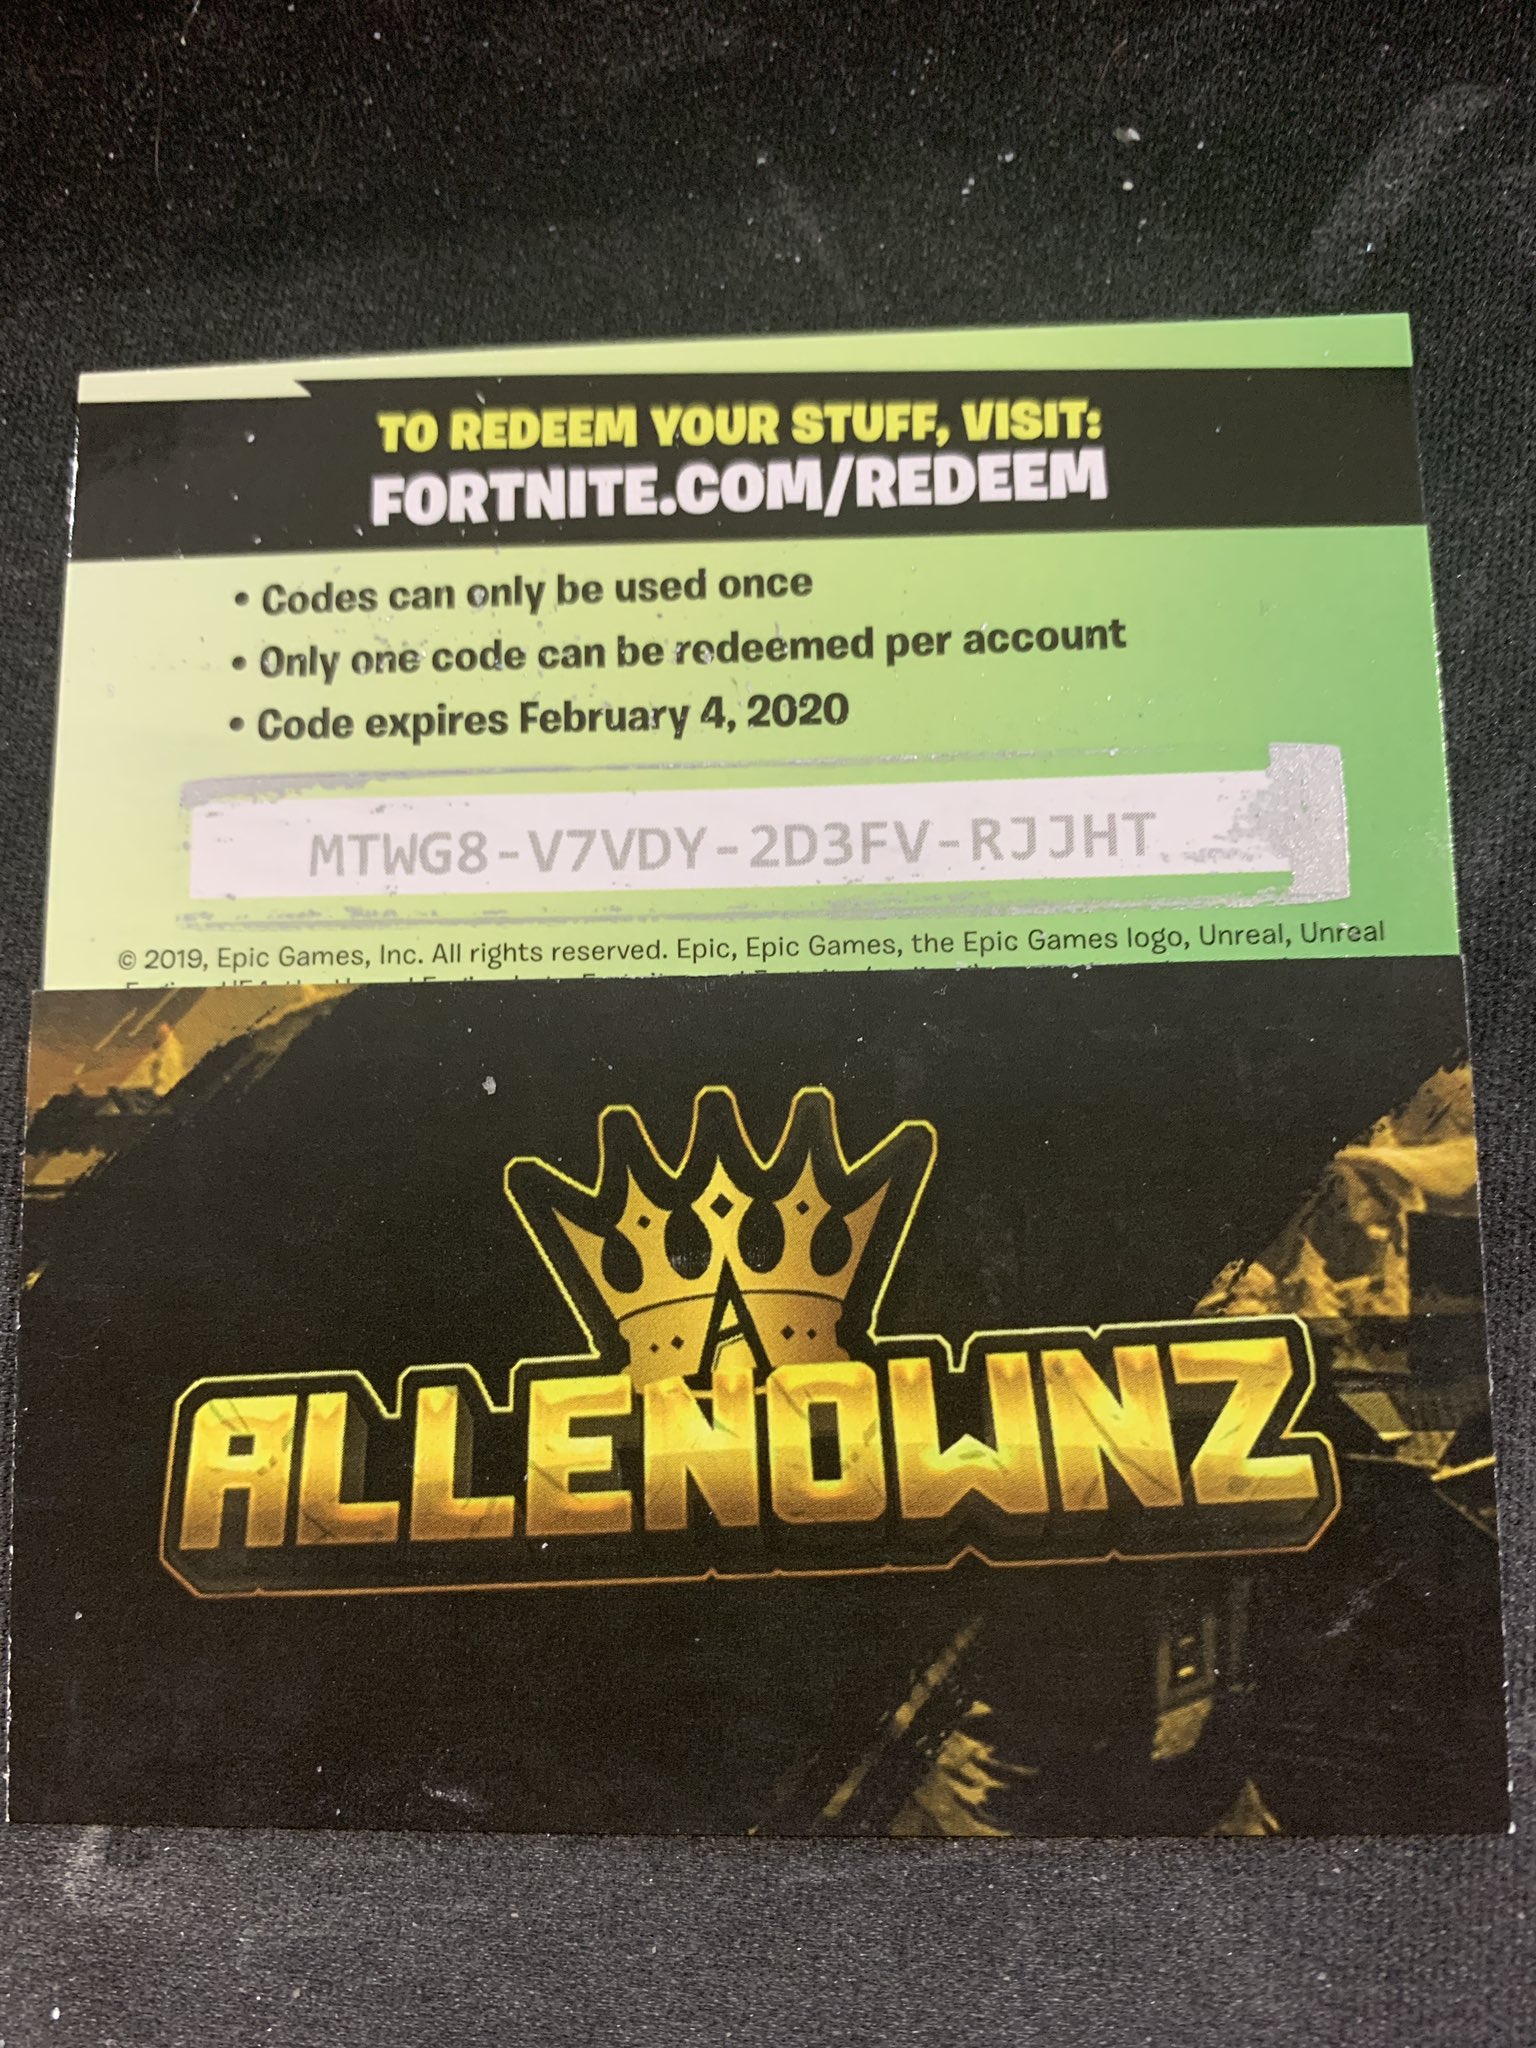 Can You Still Get The Minty Pickaxe In 2020 July Lg Allenownz On Twitter Merry Minty Pickaxe Code Here S A Code For Y All If Want Me To Post A Few More Codes Like This Like And Retweet This Tweet Prob Be A